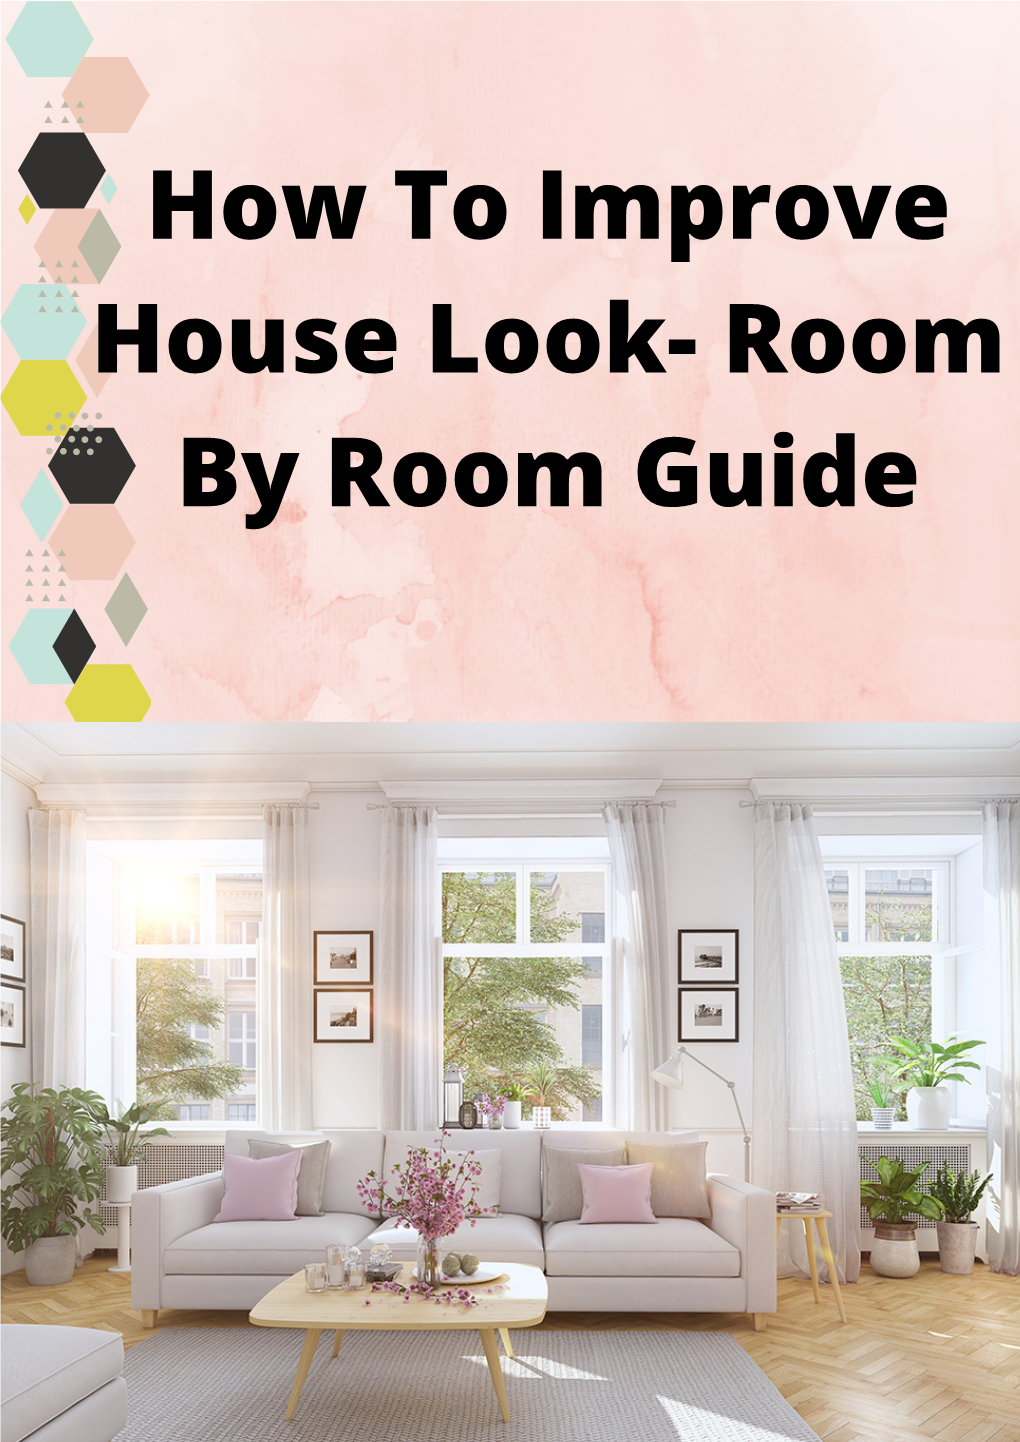 How to Improve House Look- Room by Room Guide Abstract